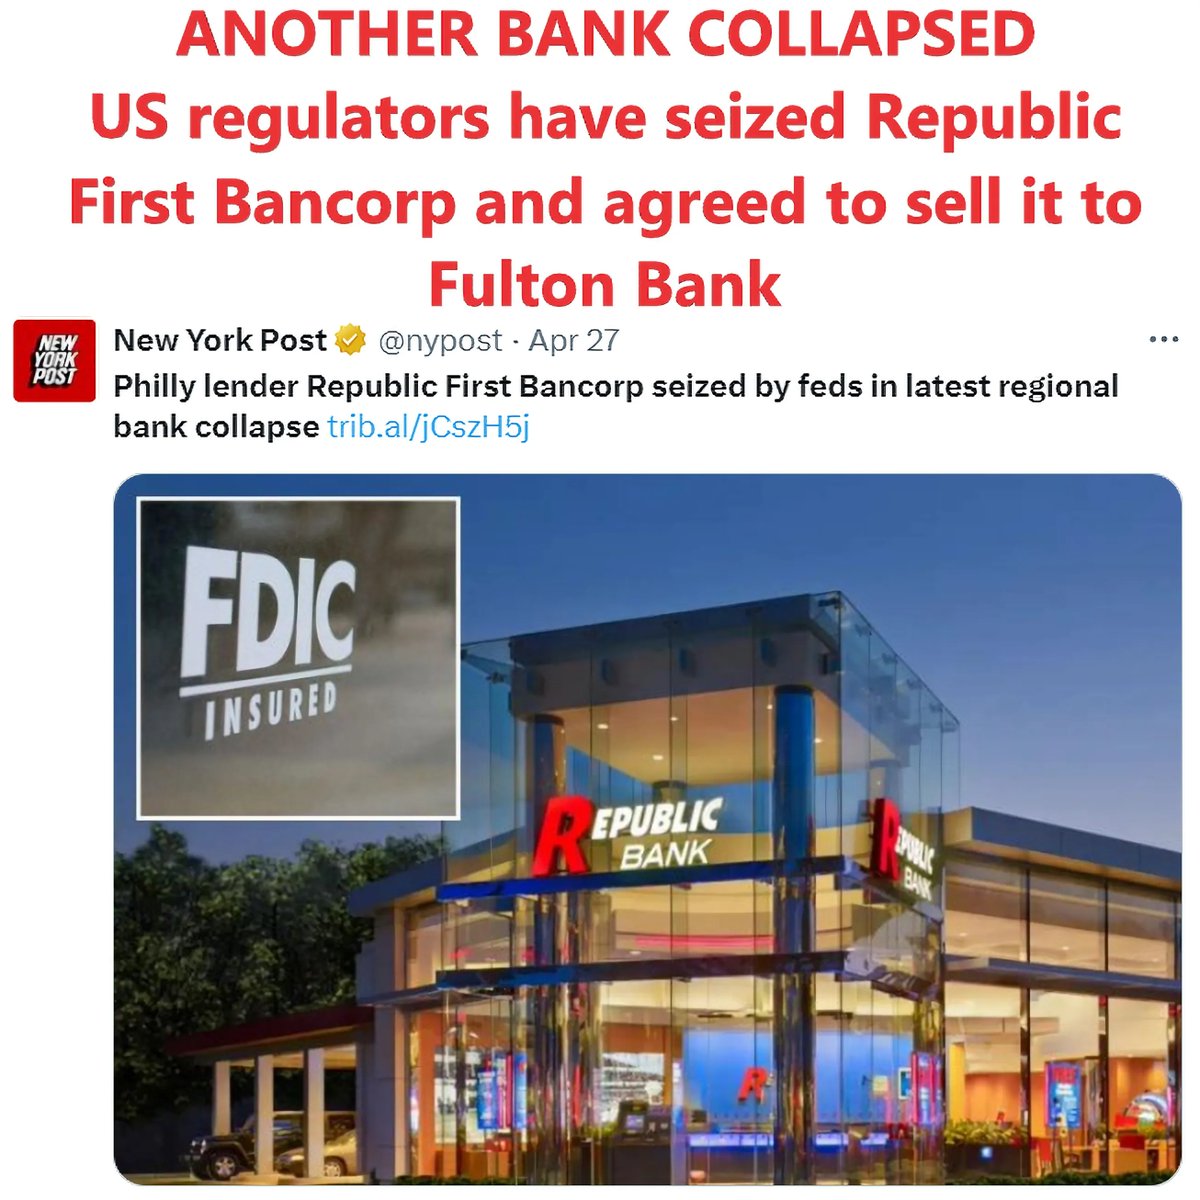 Another Bank Collapsed. US regulators have seized Republic First Bancorp and agreed to sell it to Fulton Bank. 
We've had multiple prophecies about banks collapsing. This will continue. #prophecy #BankingCrisis #bank

Details here: youtube.com/@PropheticMone…